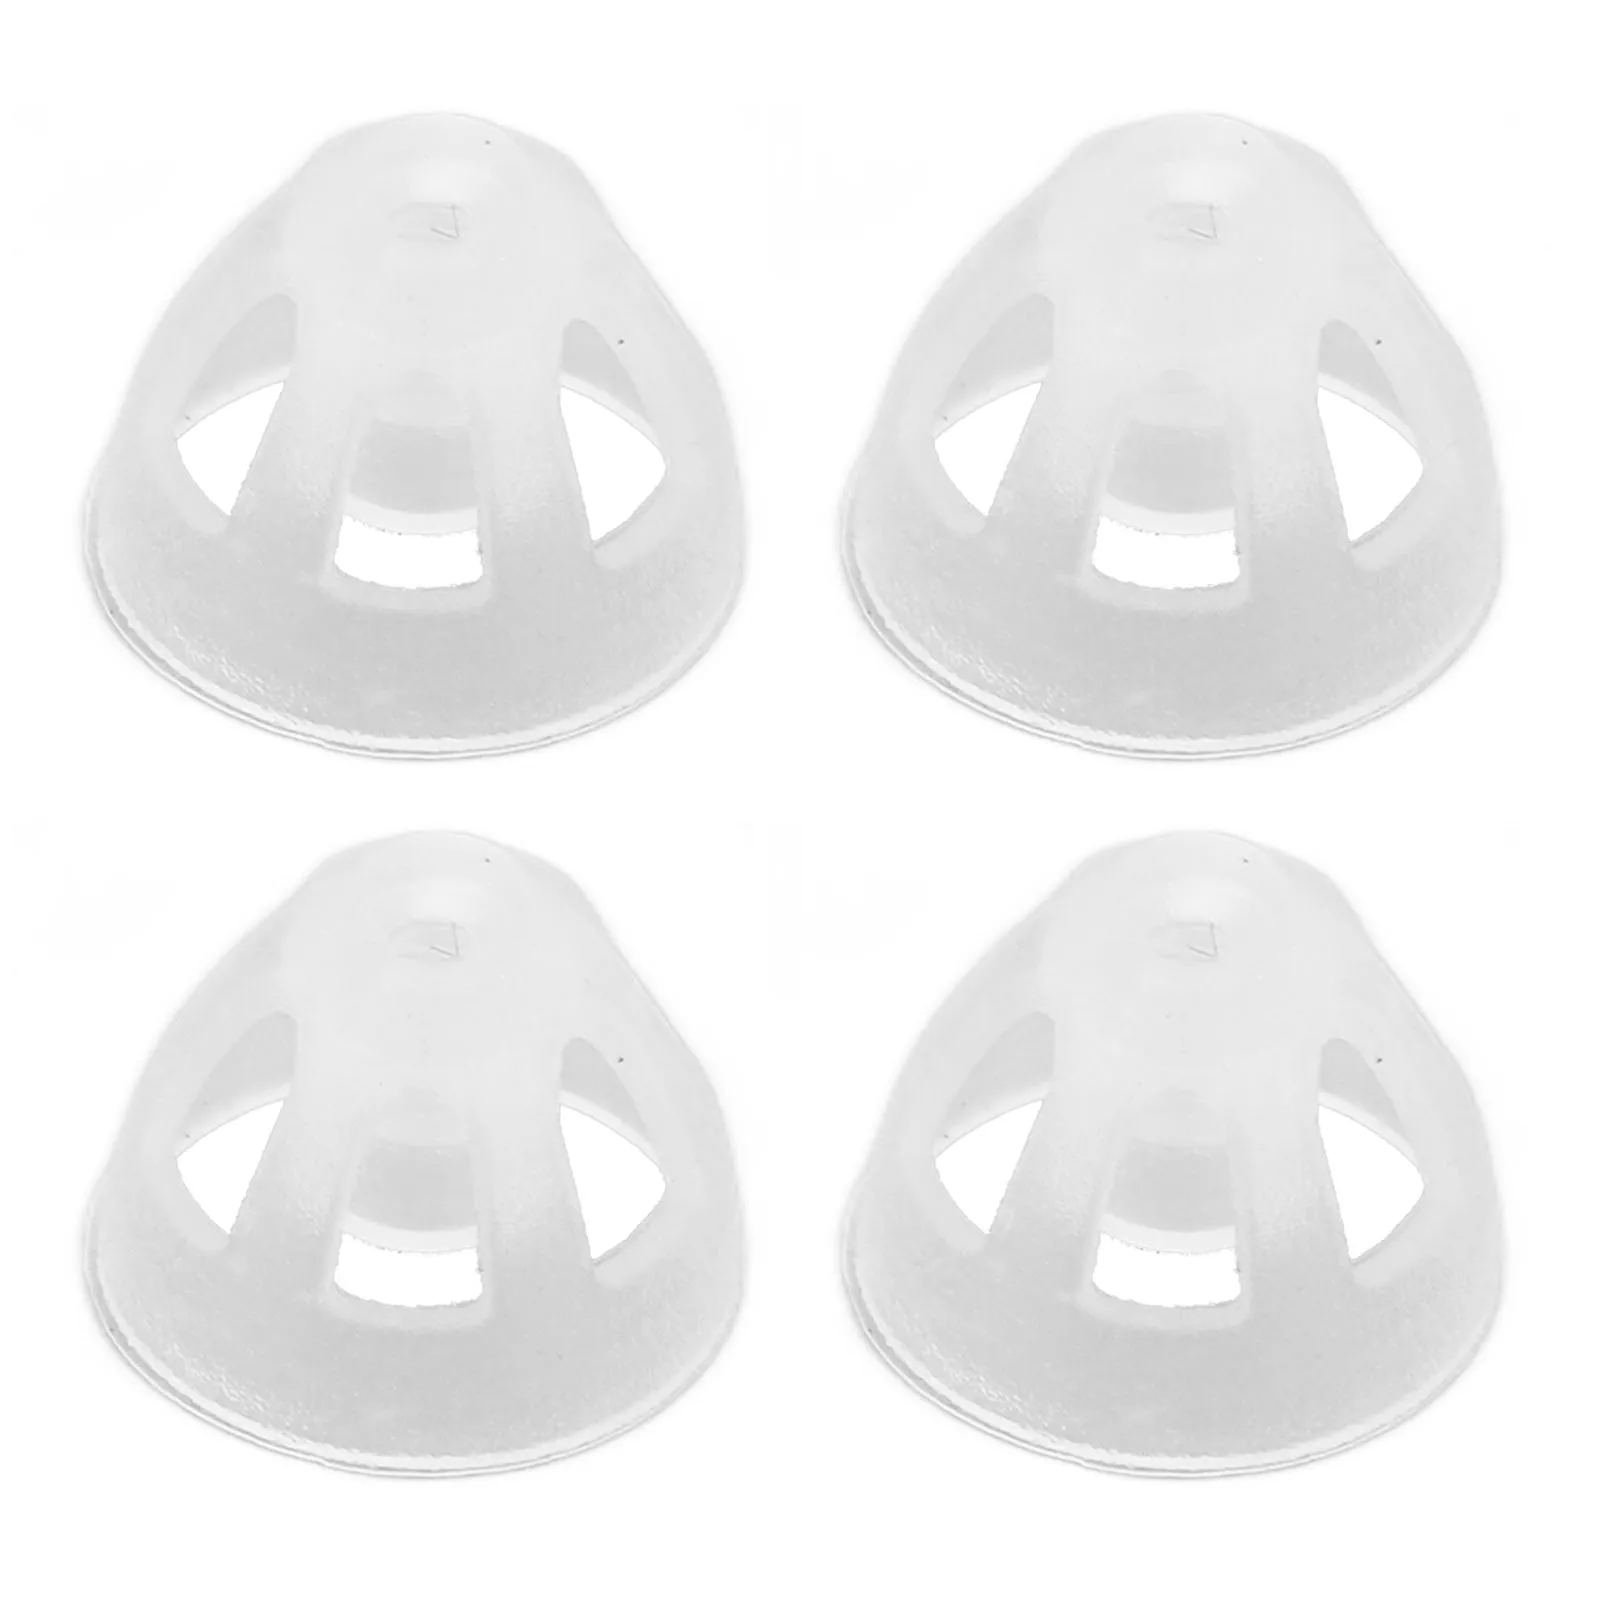 

10PCS MiniFit Hearing Aid Open Domes Transparent Silicone Ear Plugs Replacement Amplifier Hearing Aid Accessories Parts 8mm/10mm